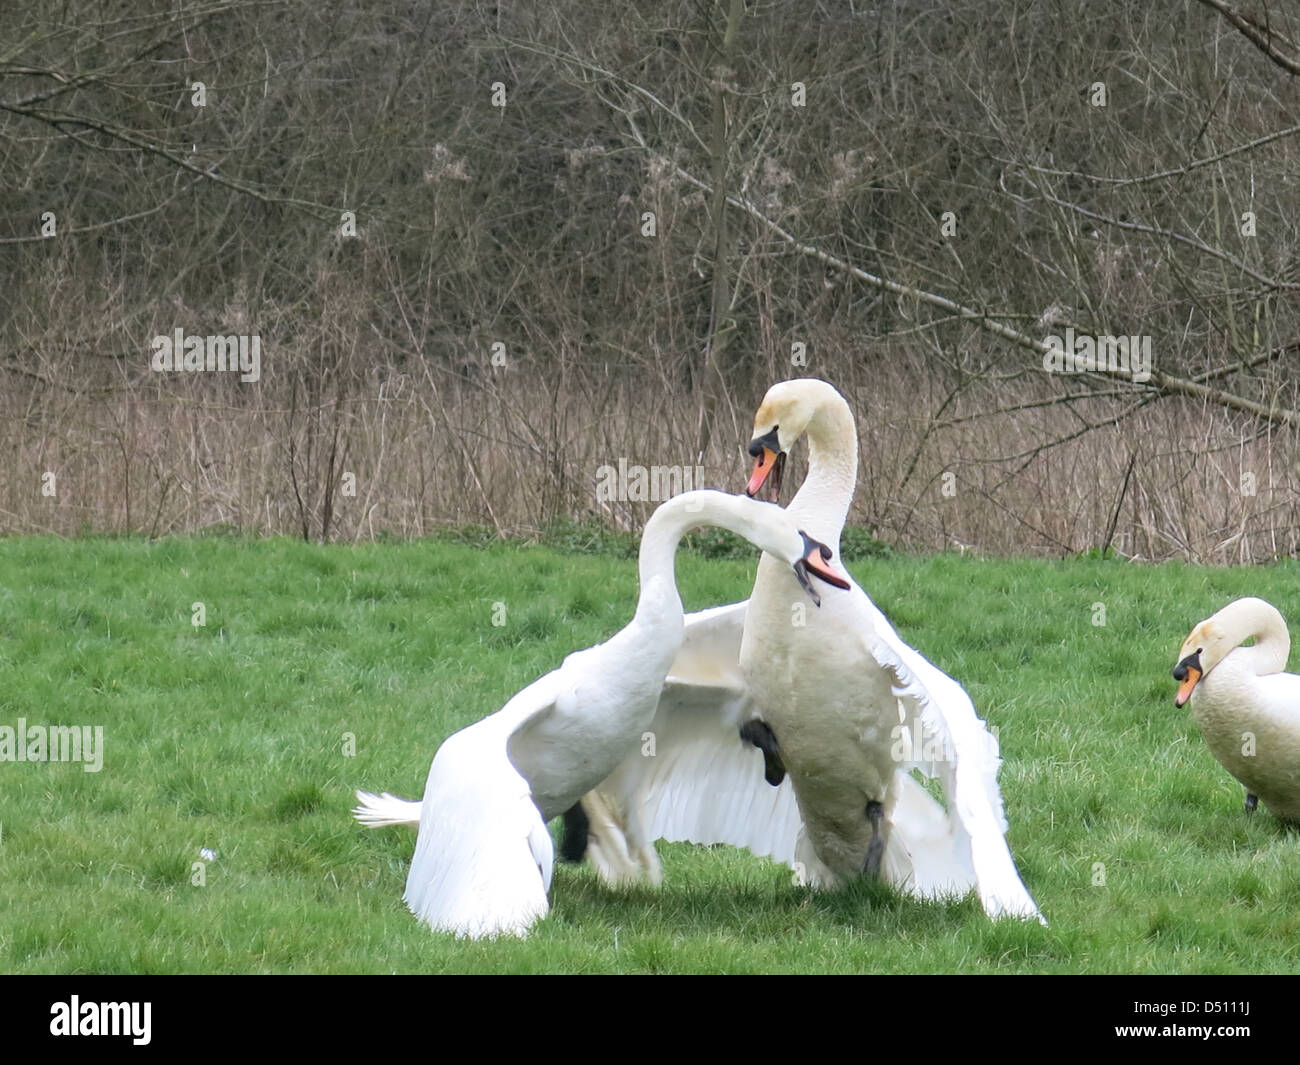 Swans Mating Ritual March 2013 Stock Photo